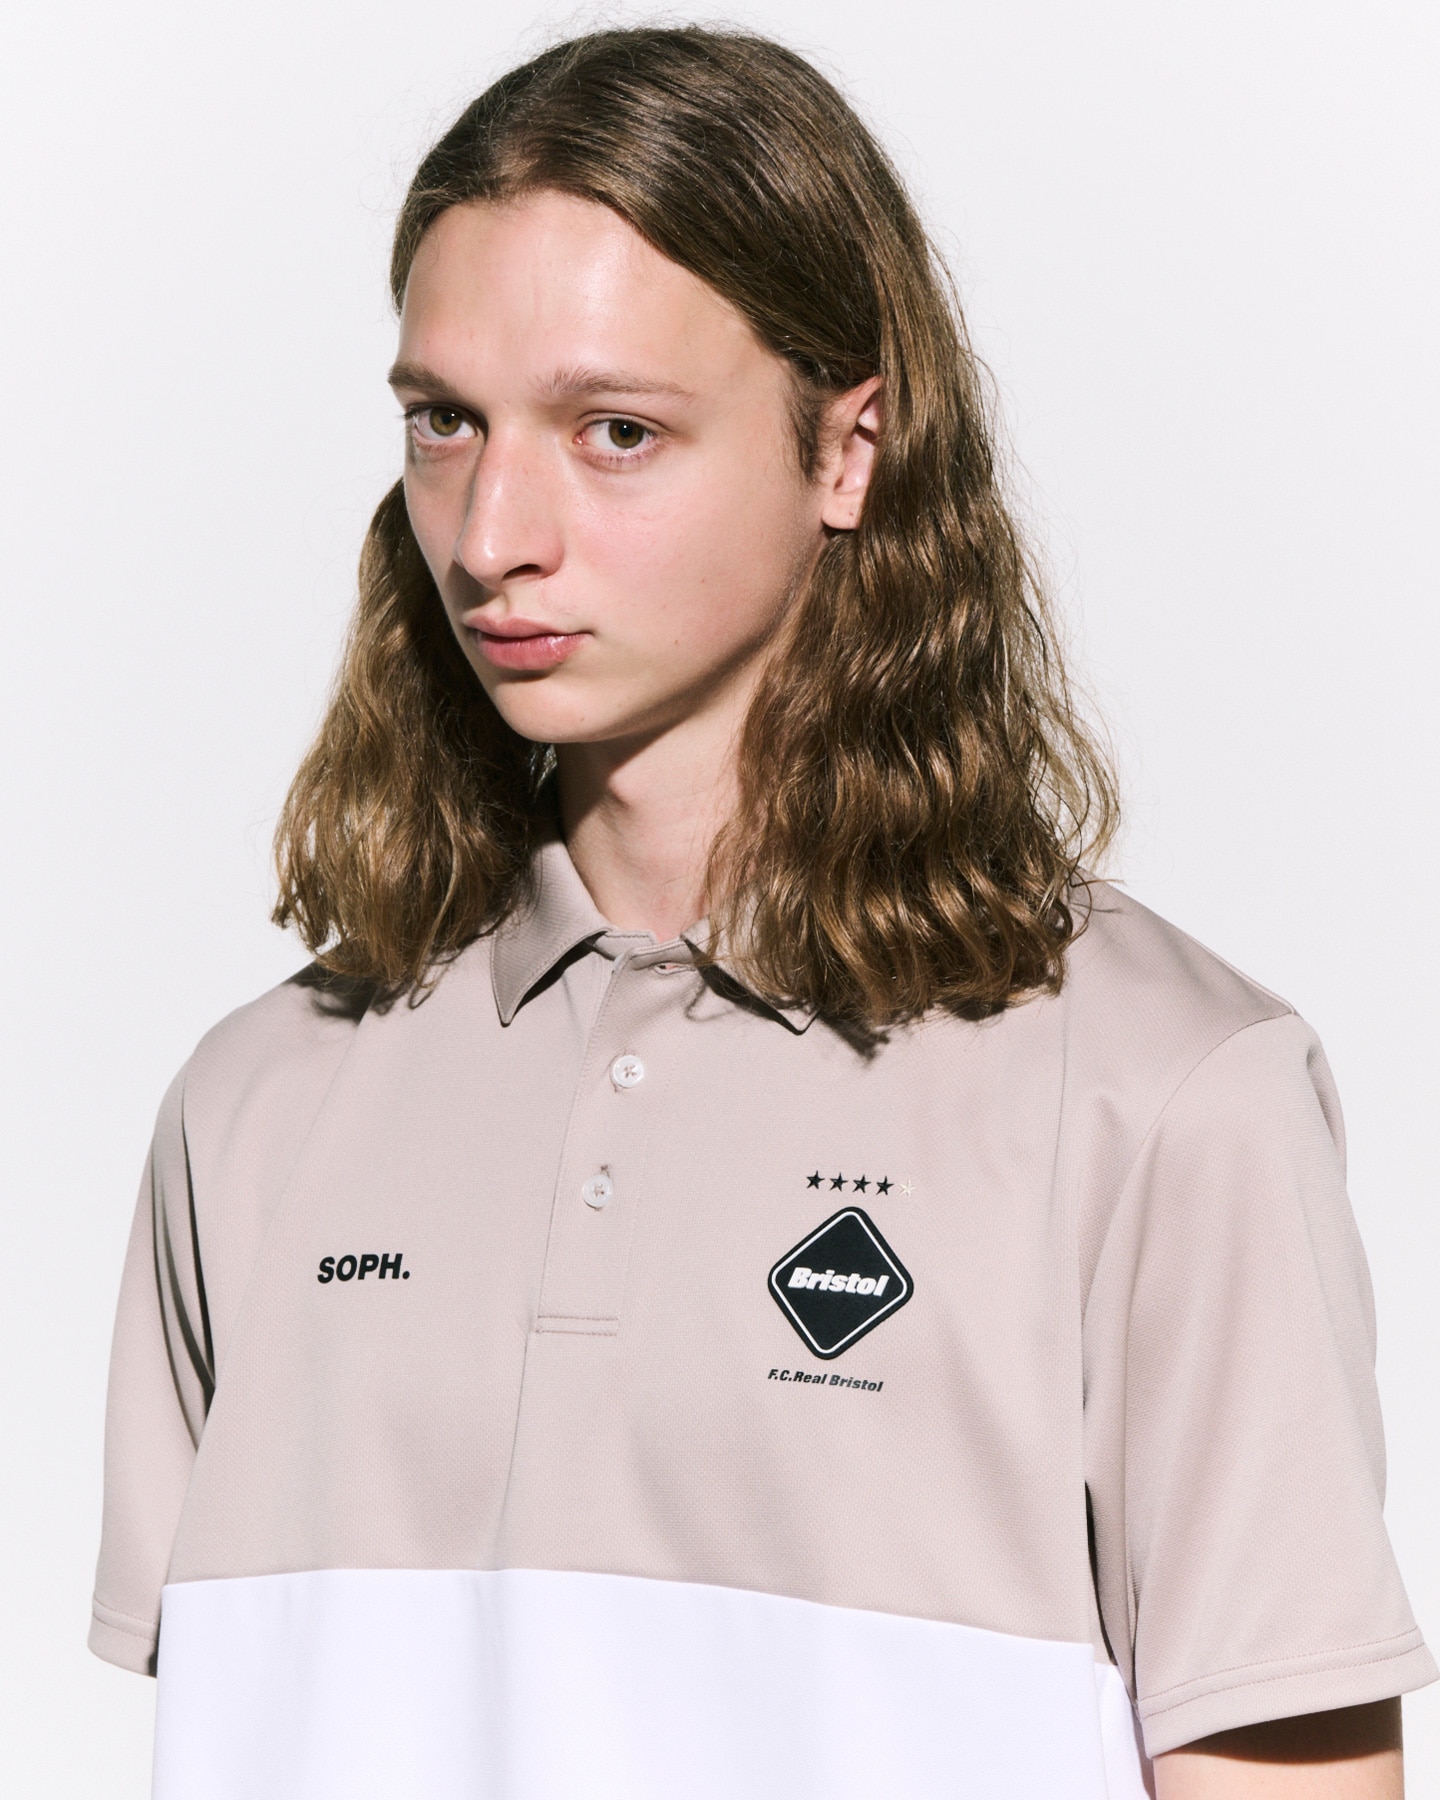 M FCRB S/S TEAM POLO ポロシャツ ホワイト